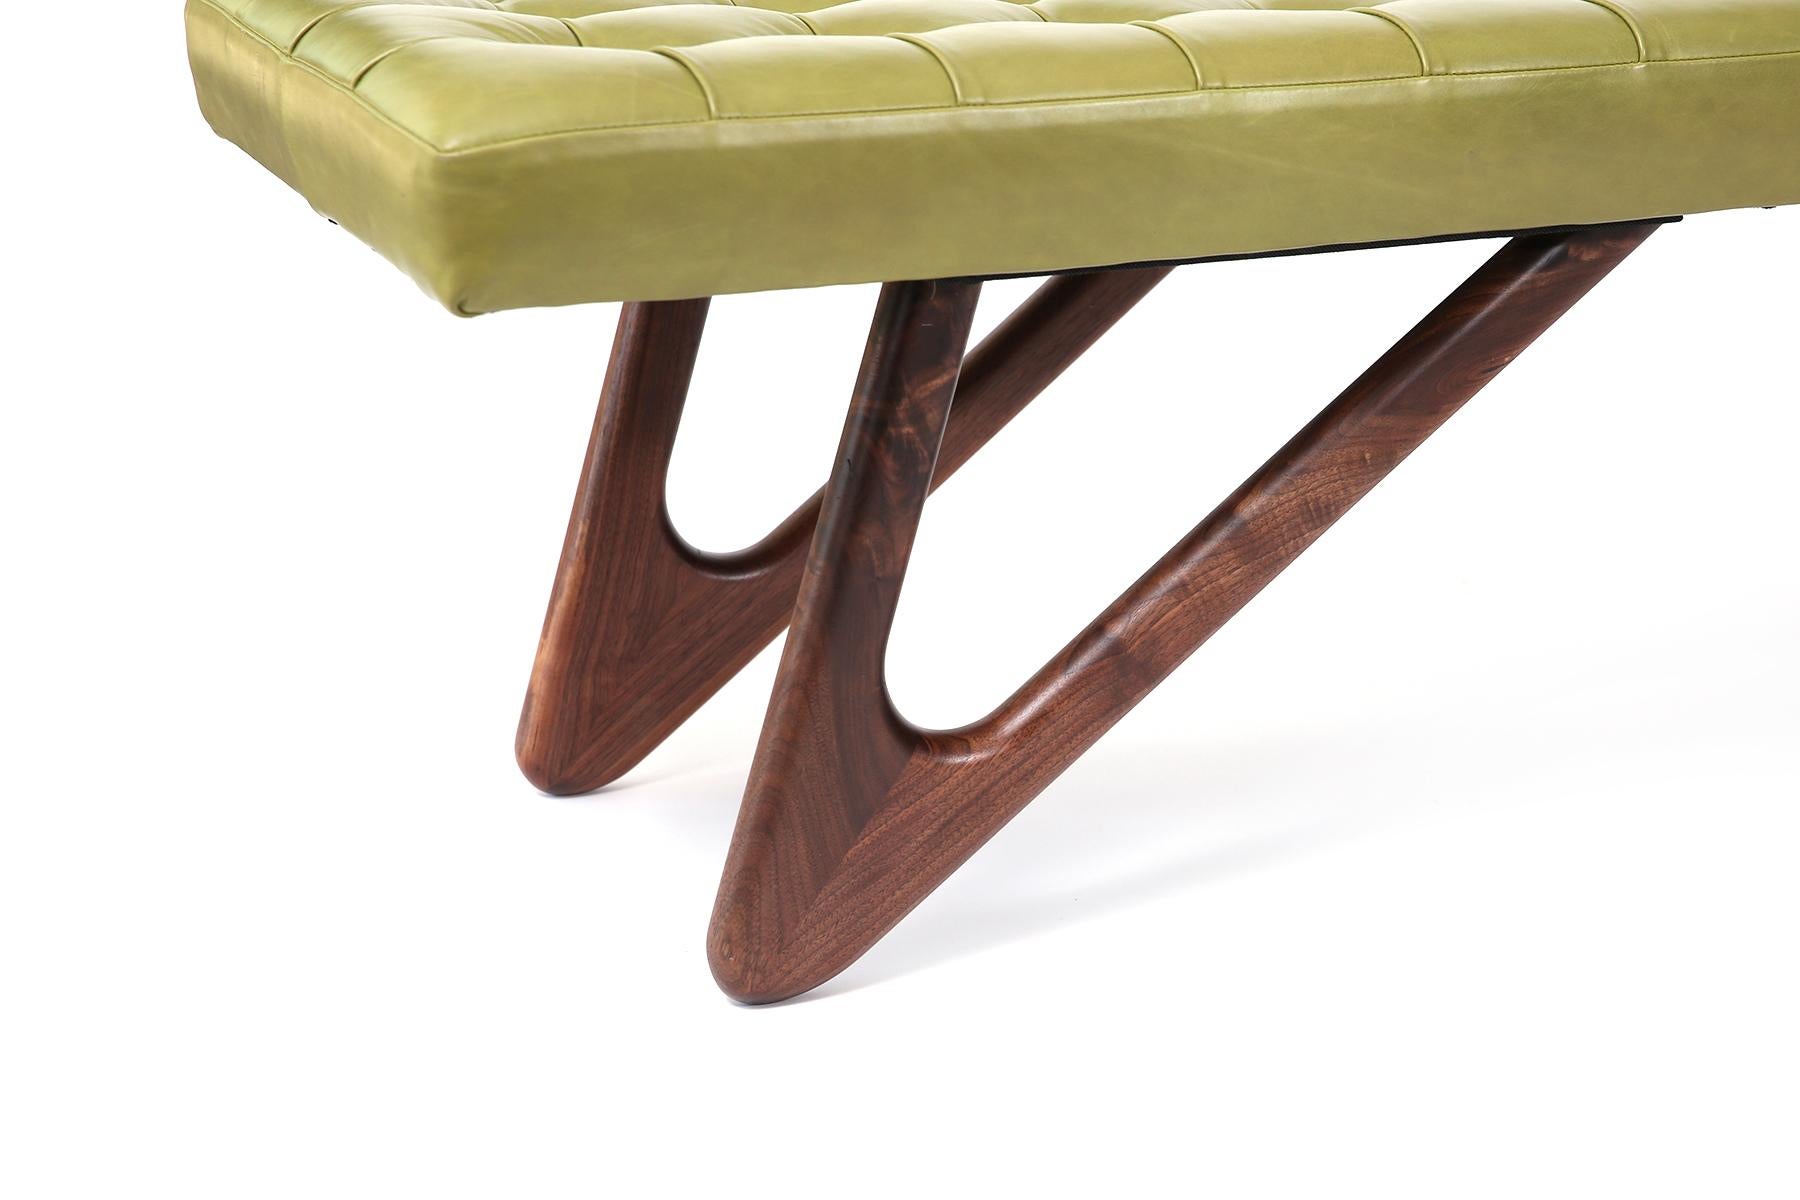 American Green Tufted Leather and Sculpted Walnut Bench